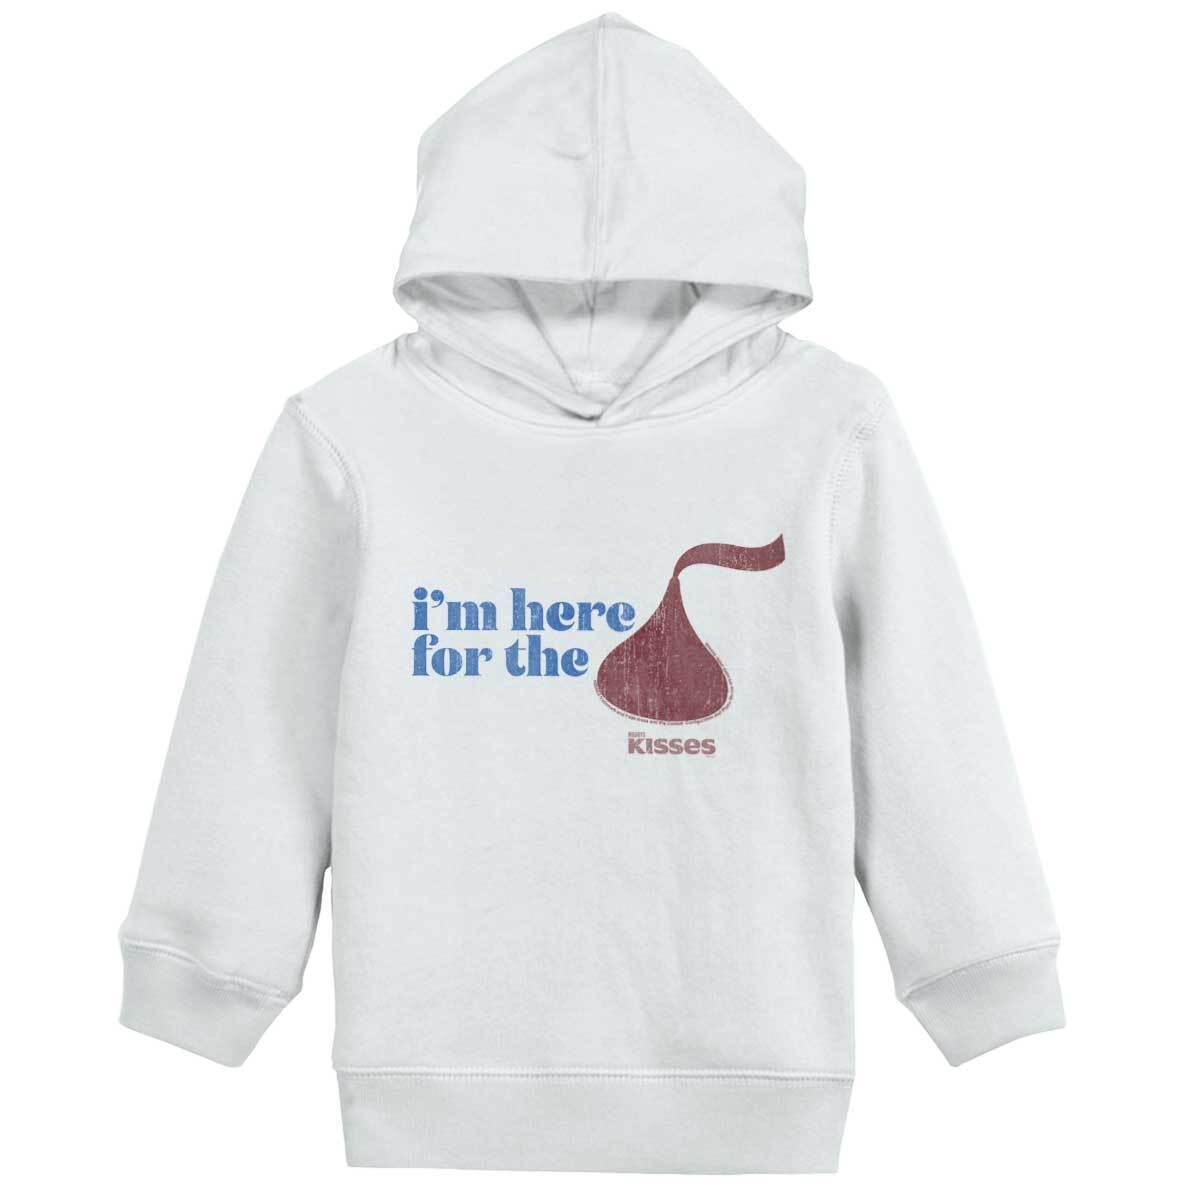 I'm Here For The Kisses Hershey's Chocolate Toddler Boy Girl Hoodie Sweatshirts